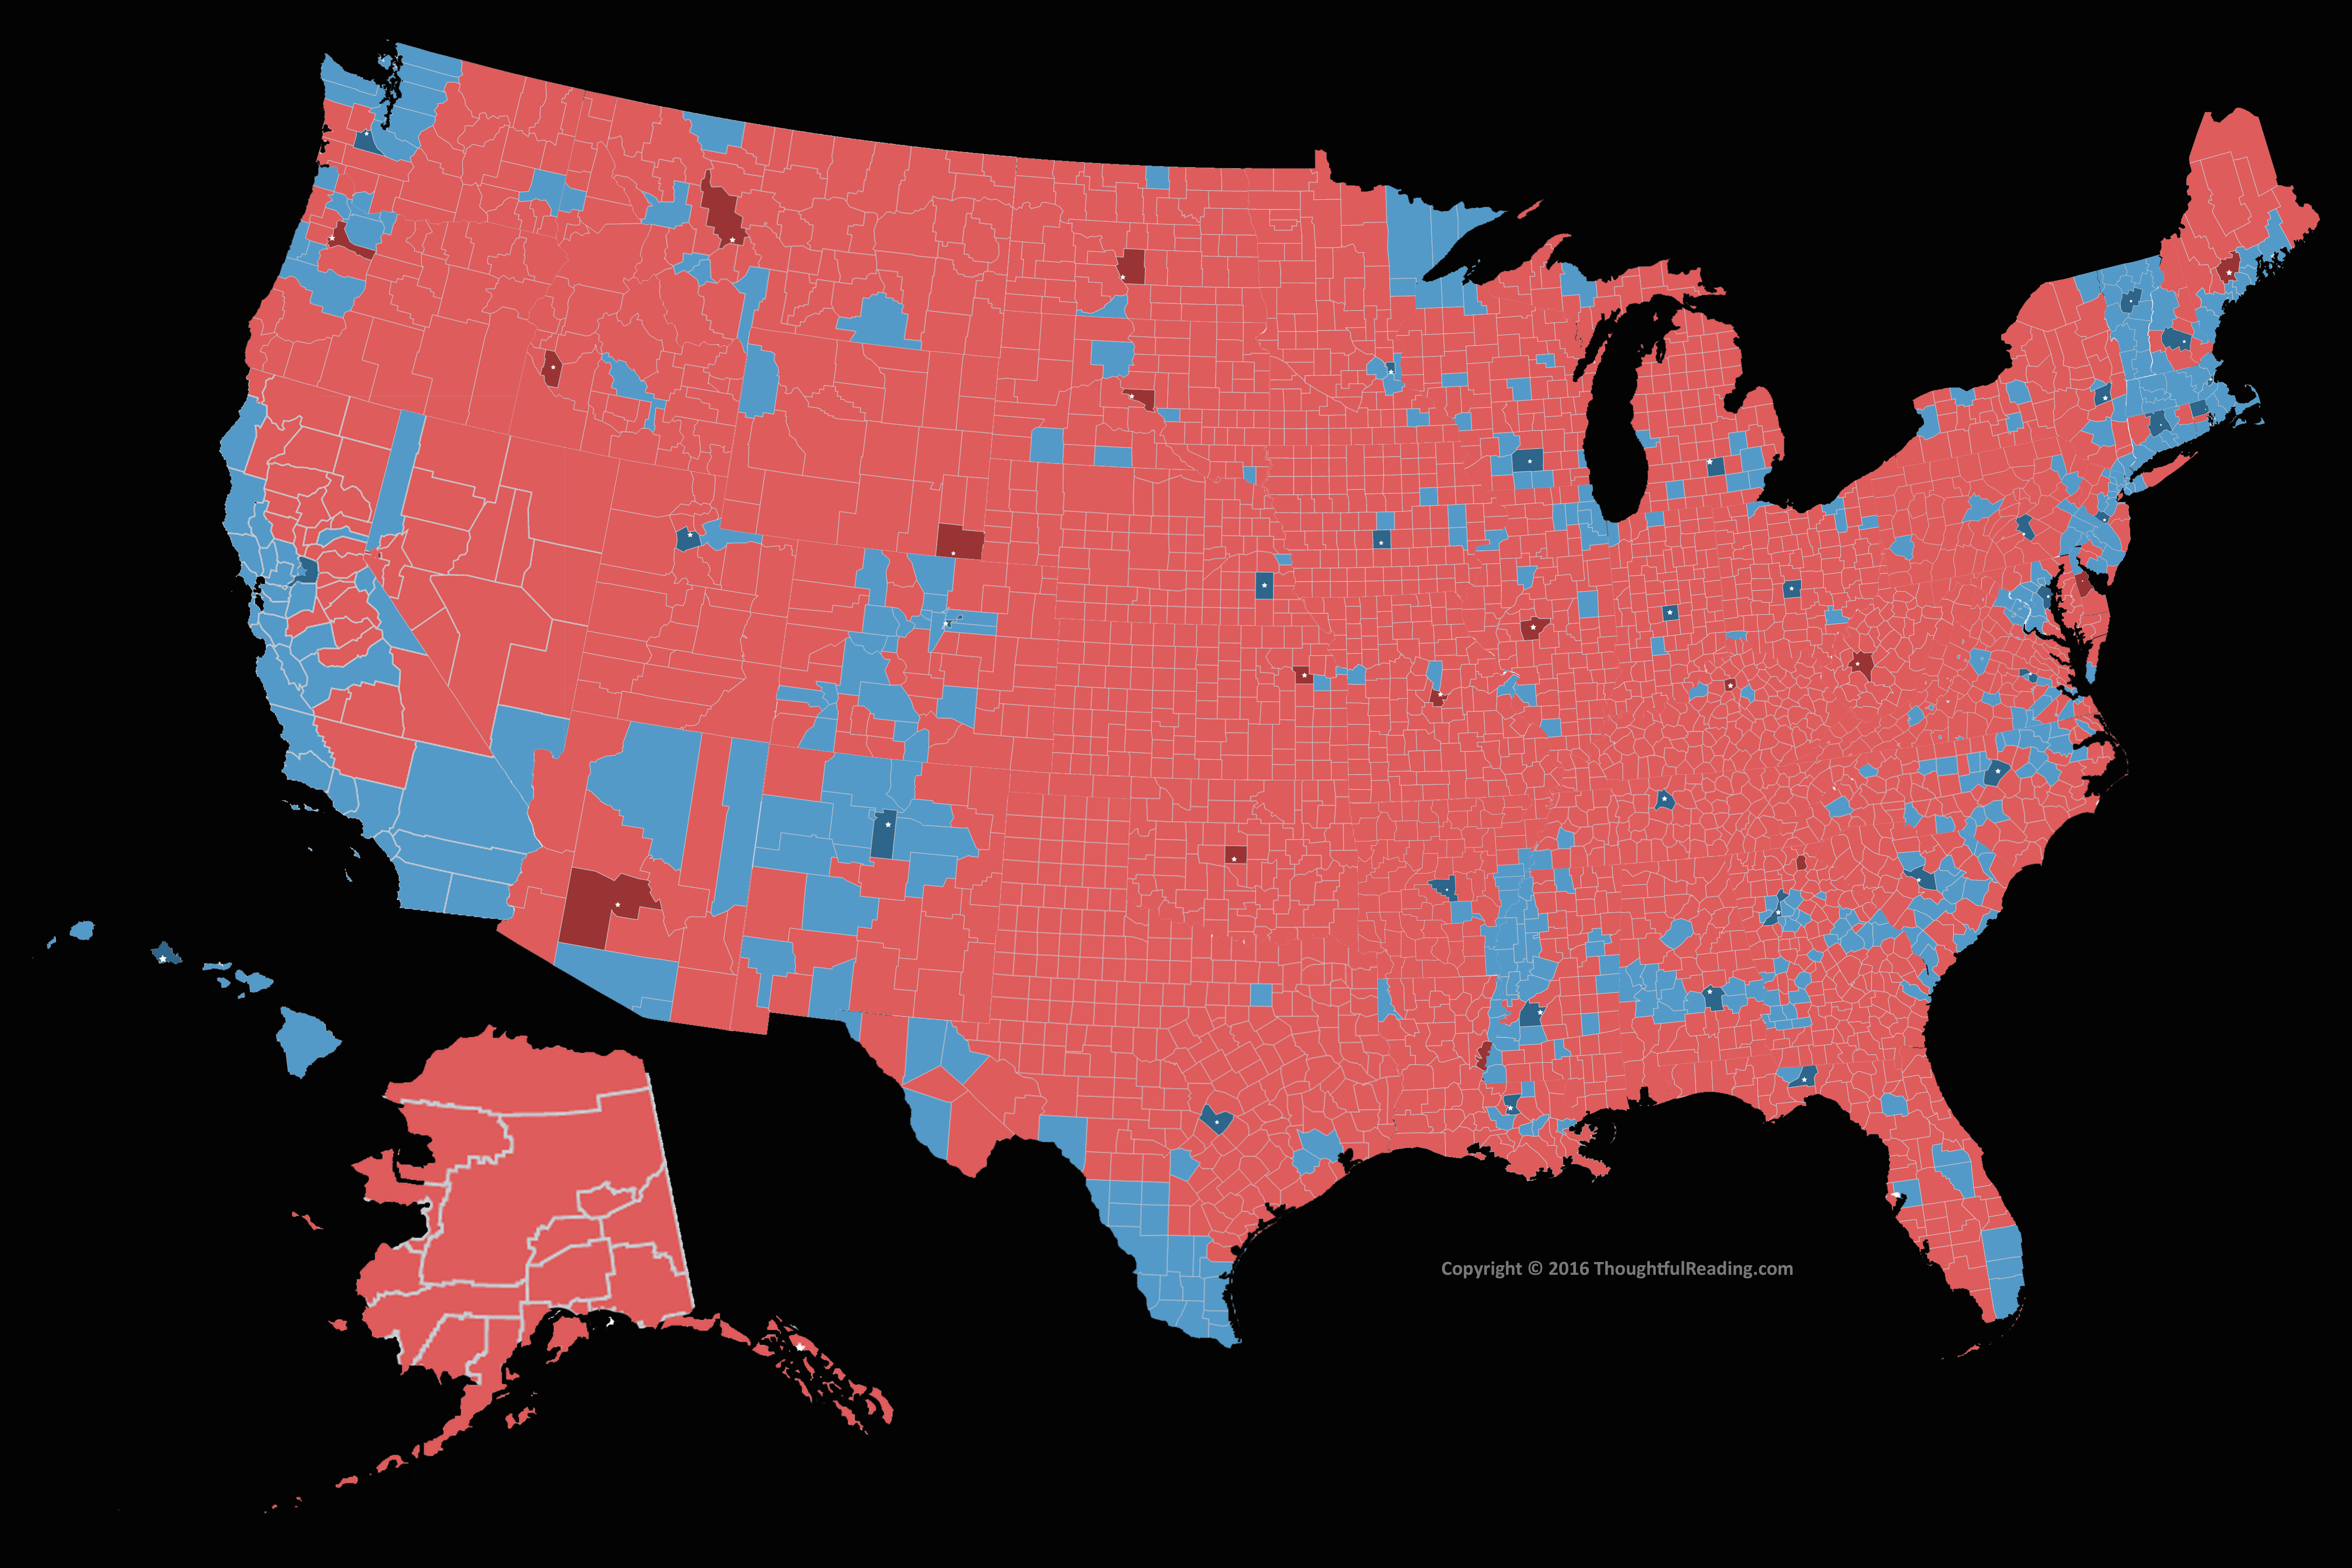 us-2016-presidential-election-map-full-size.png